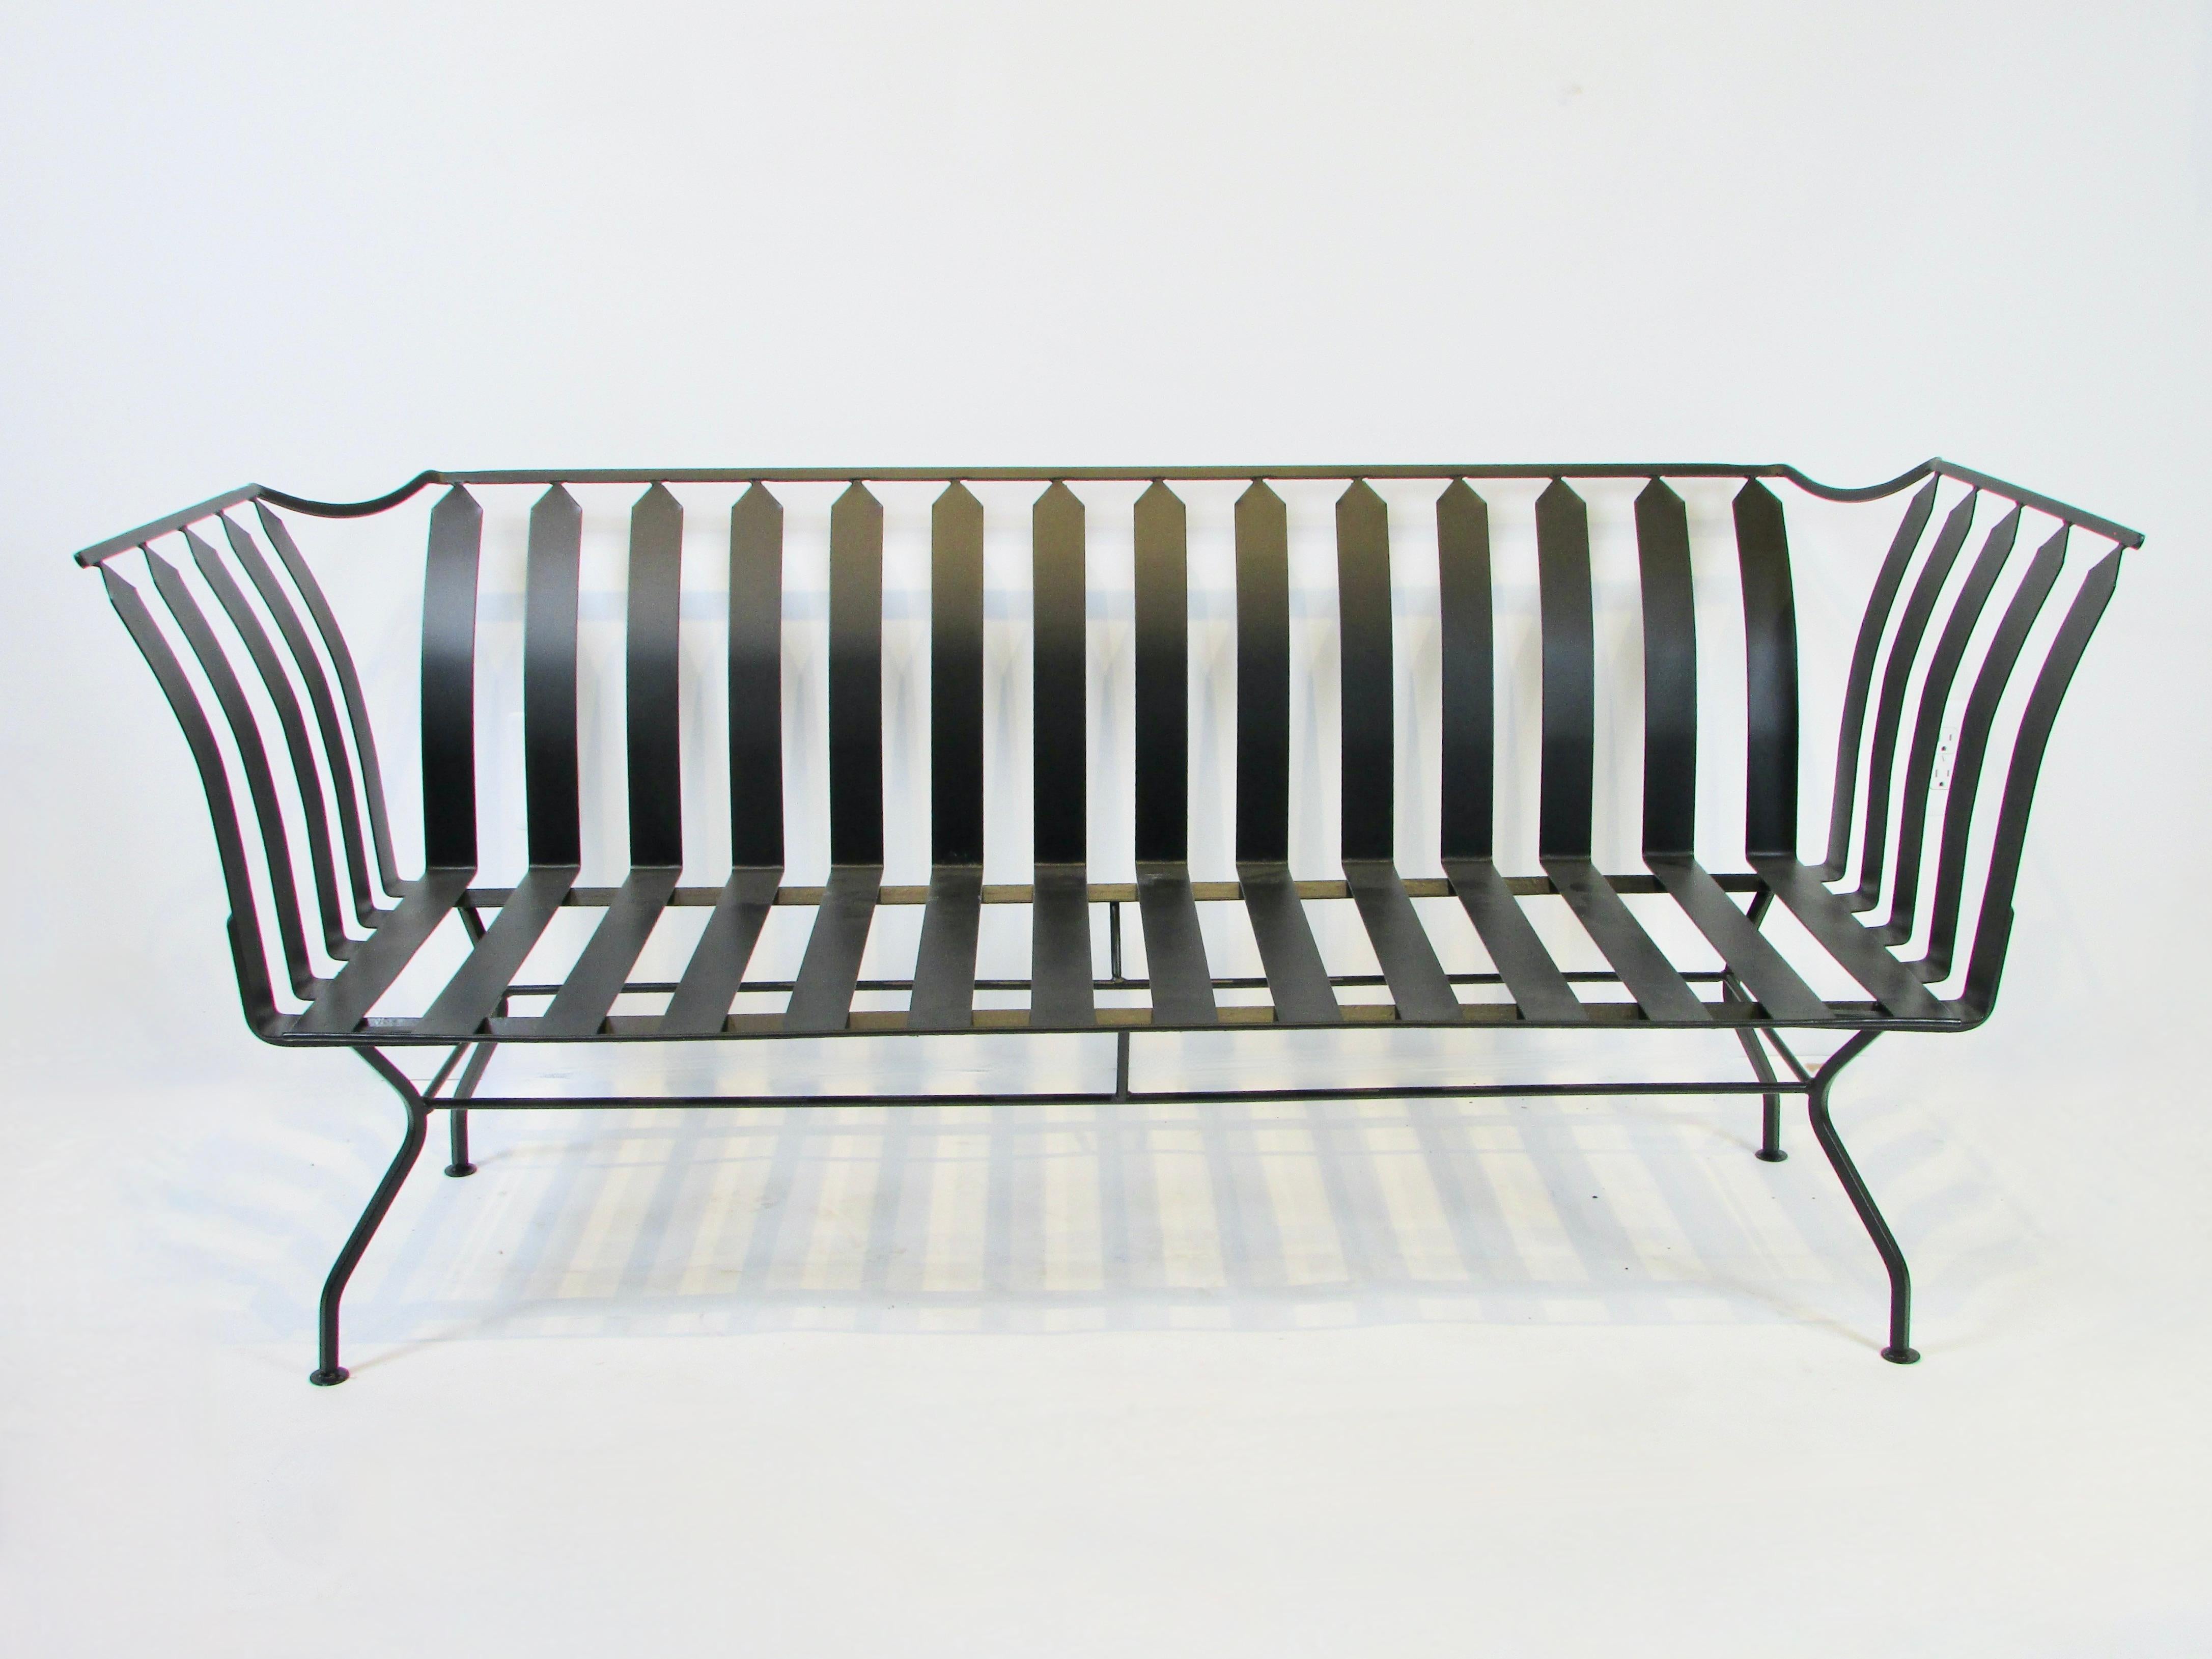 American Classic influenced Modernist Wrought Iron Garden Bench in Matte Black Finish